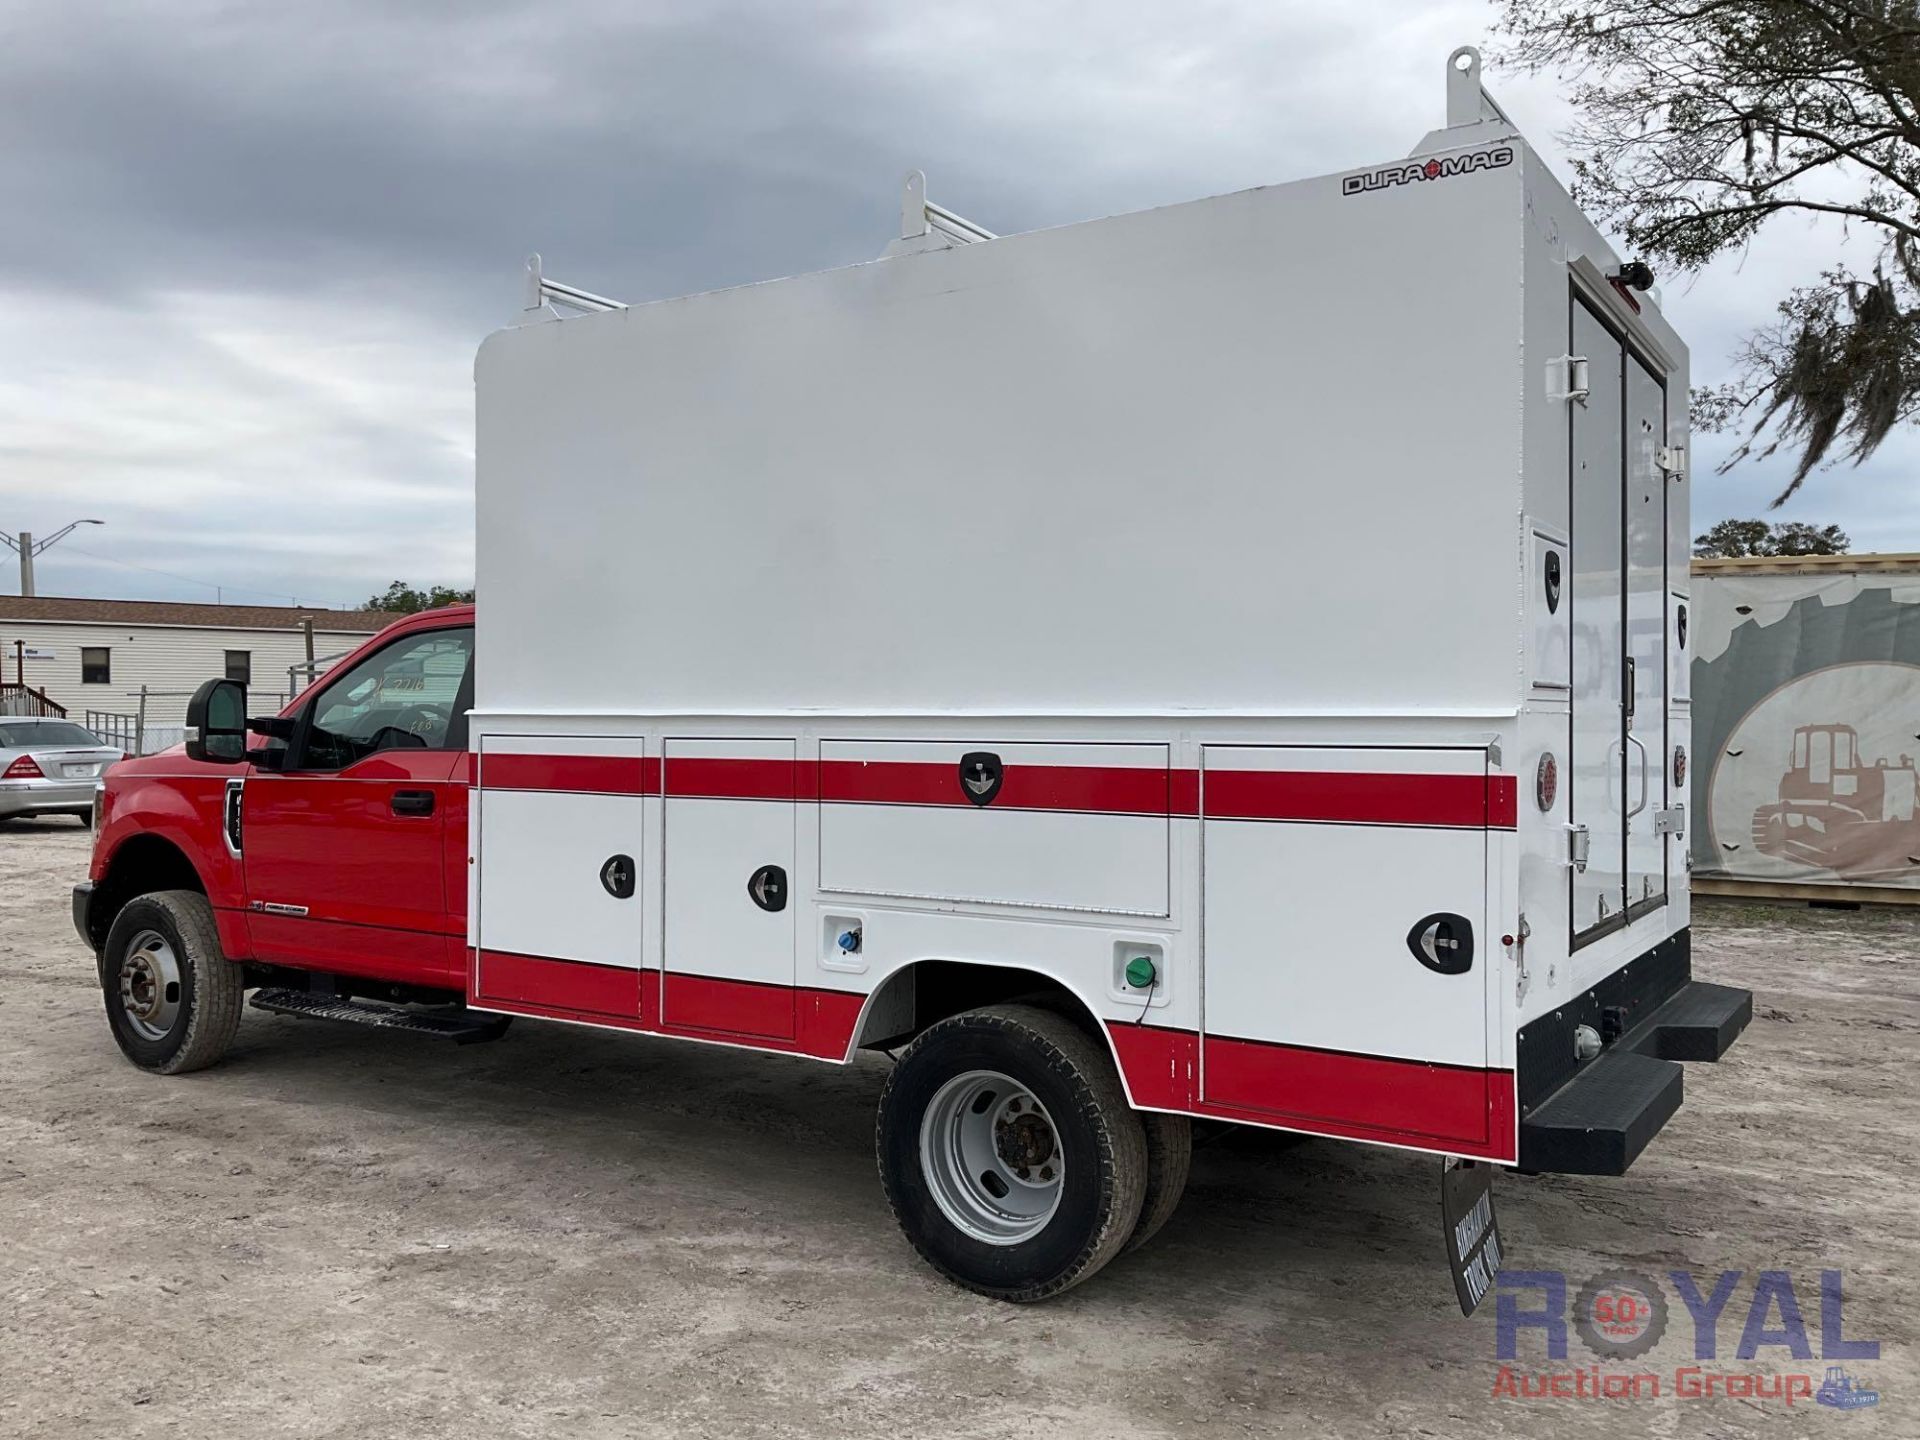 2019 Ford F350 4x4 Service Truck - Image 4 of 30